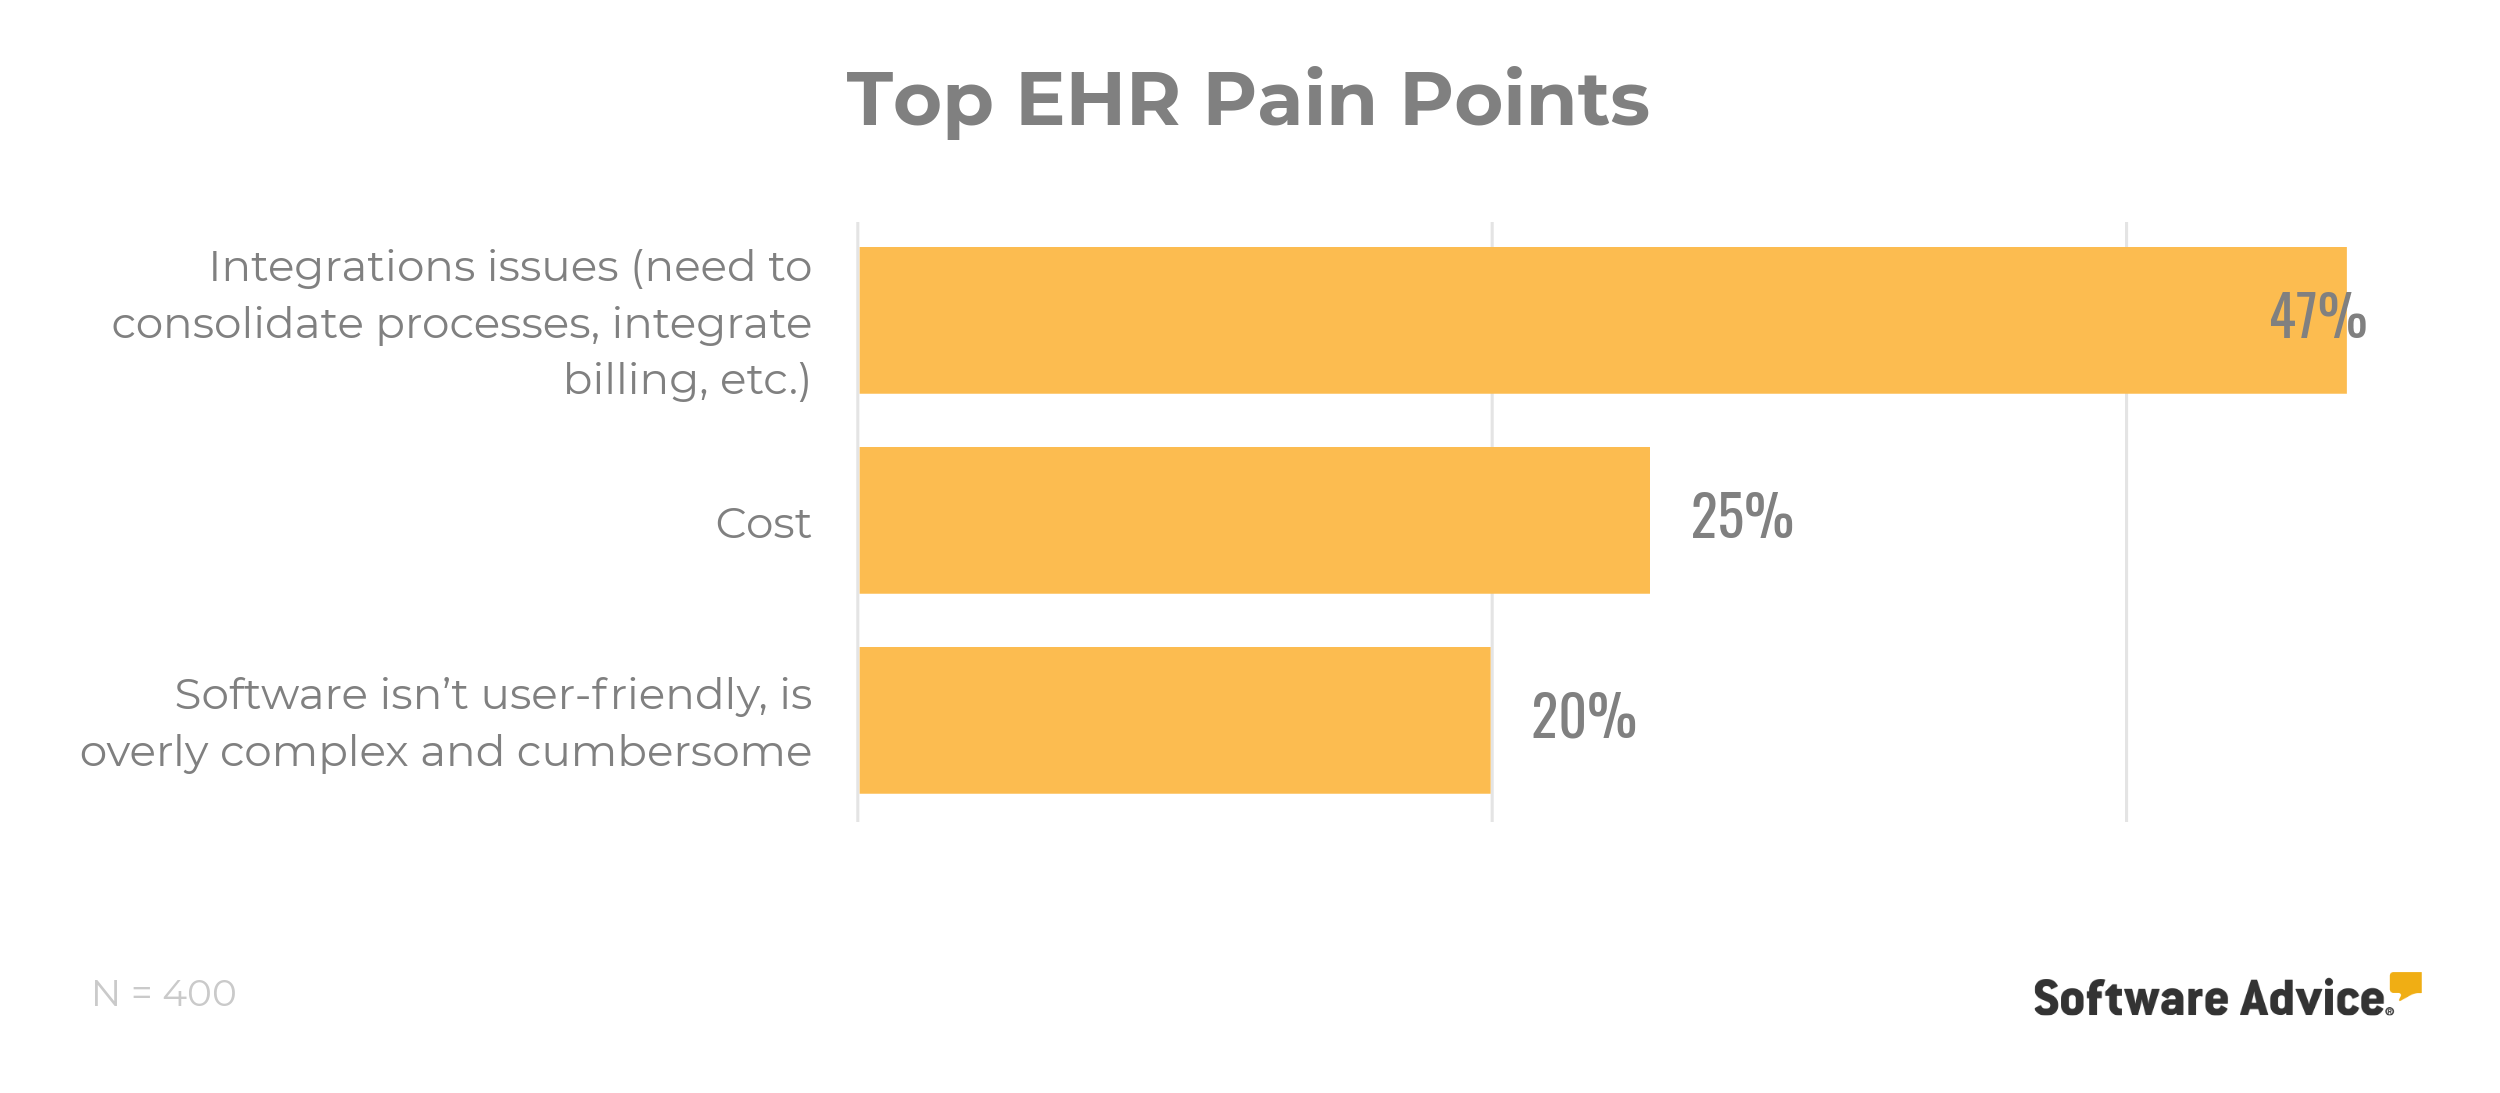 Top-EHR-pain-points-according-to-users